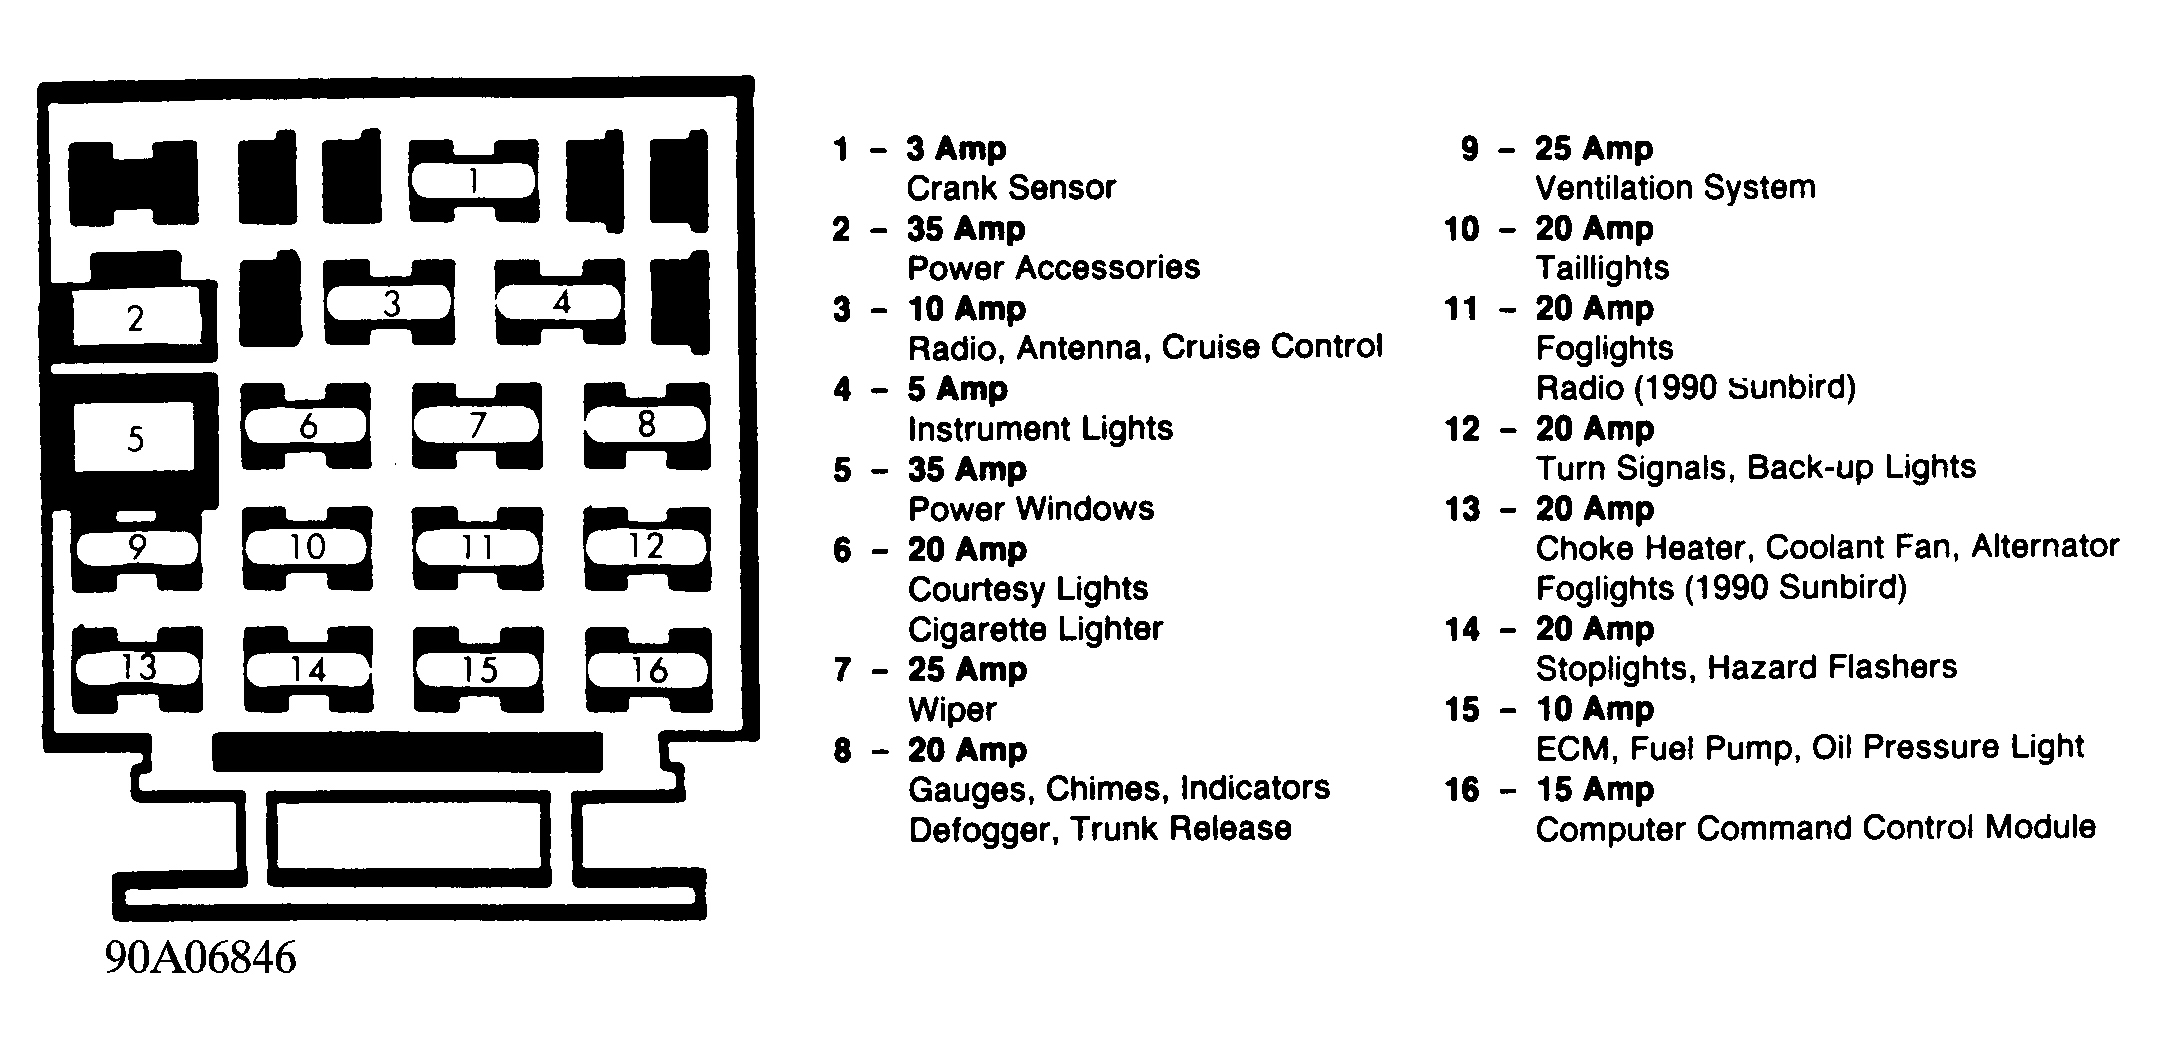 Chevrolet Cavalier RS 1992 - Component Locations -  Fuse Panel Identification (Typical 1983-90 Models)